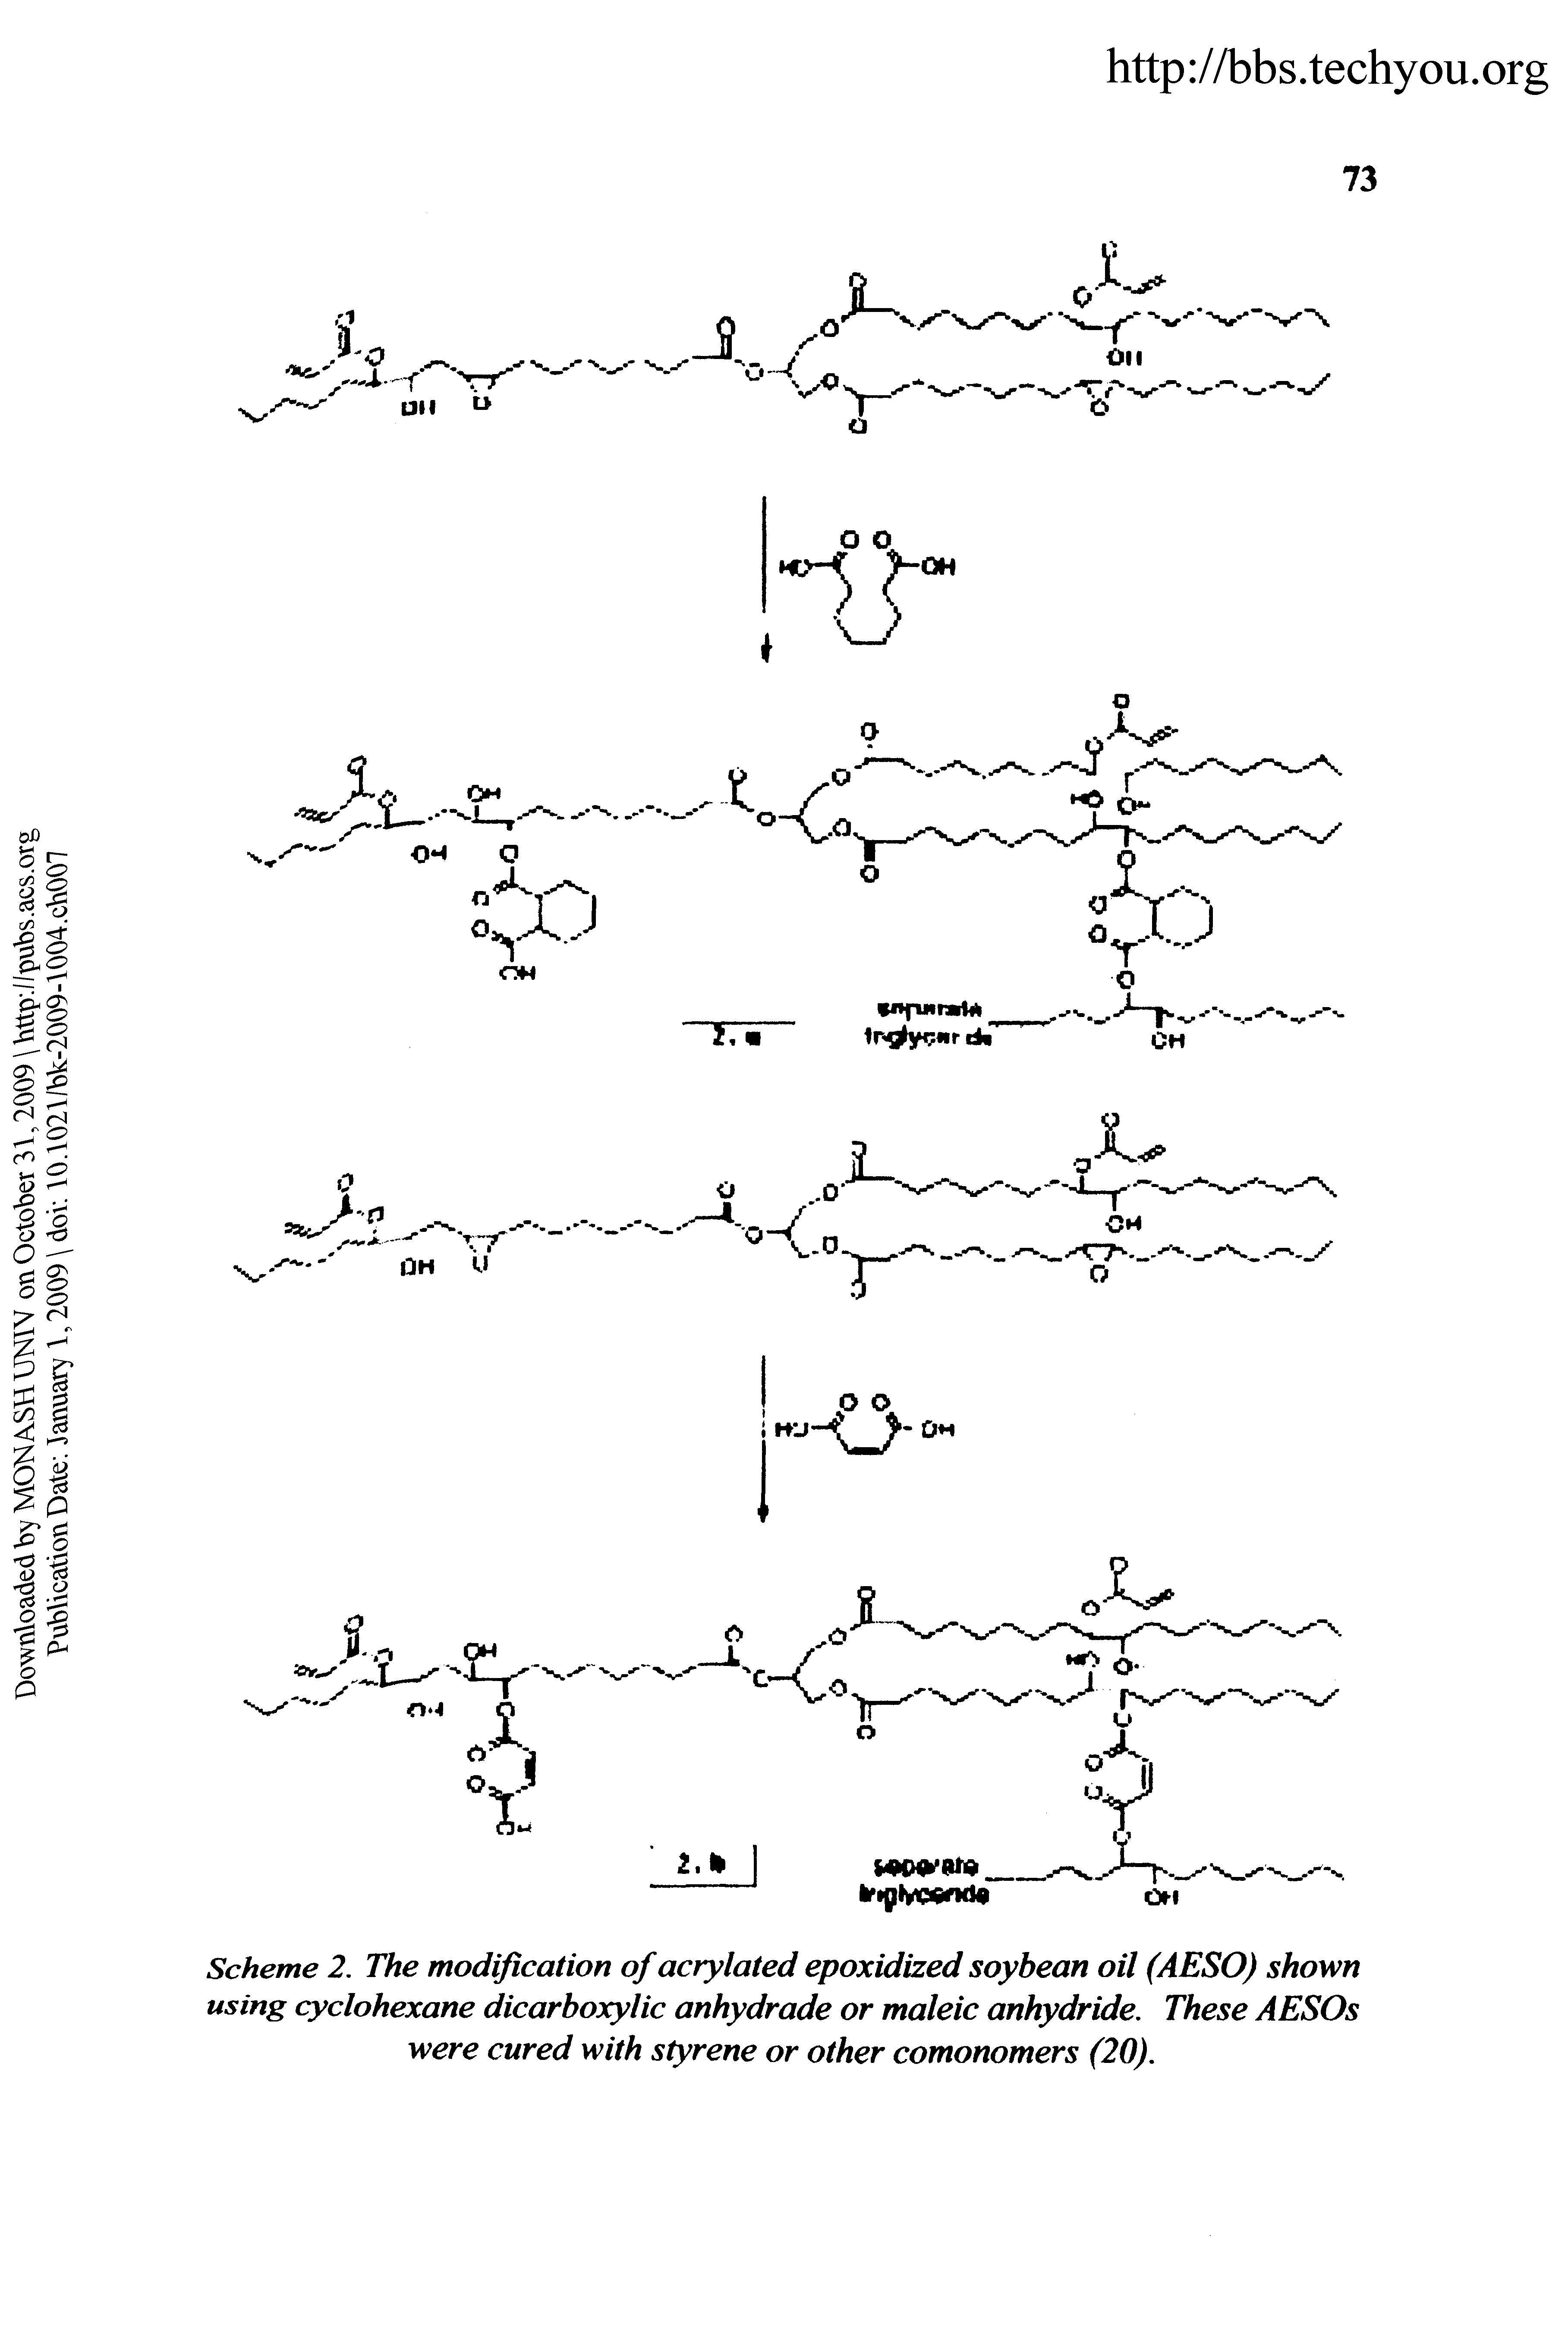 Scheme 2, The modification of acrylated epoxidized soybean oil (AESO) shown using cyclohexane dicarboxylic anhydrade or maleic anhydride. These AESOs were cured with styrene or other comonomers (20).